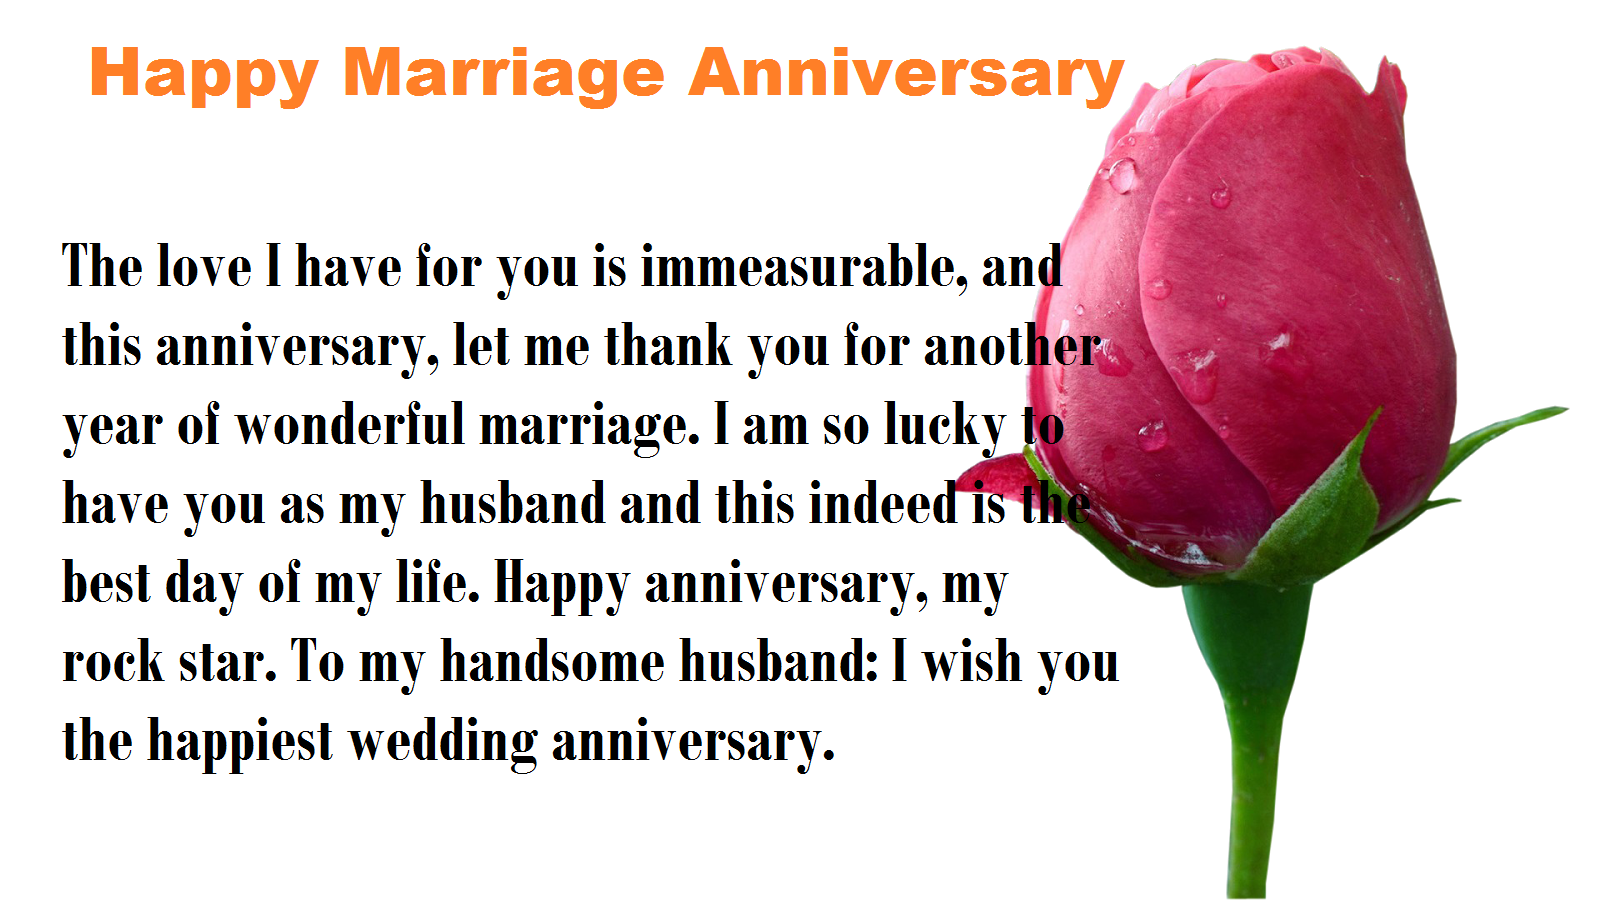 Happy-Marriage-Anniversary-Quotes-Images-Wallpapers